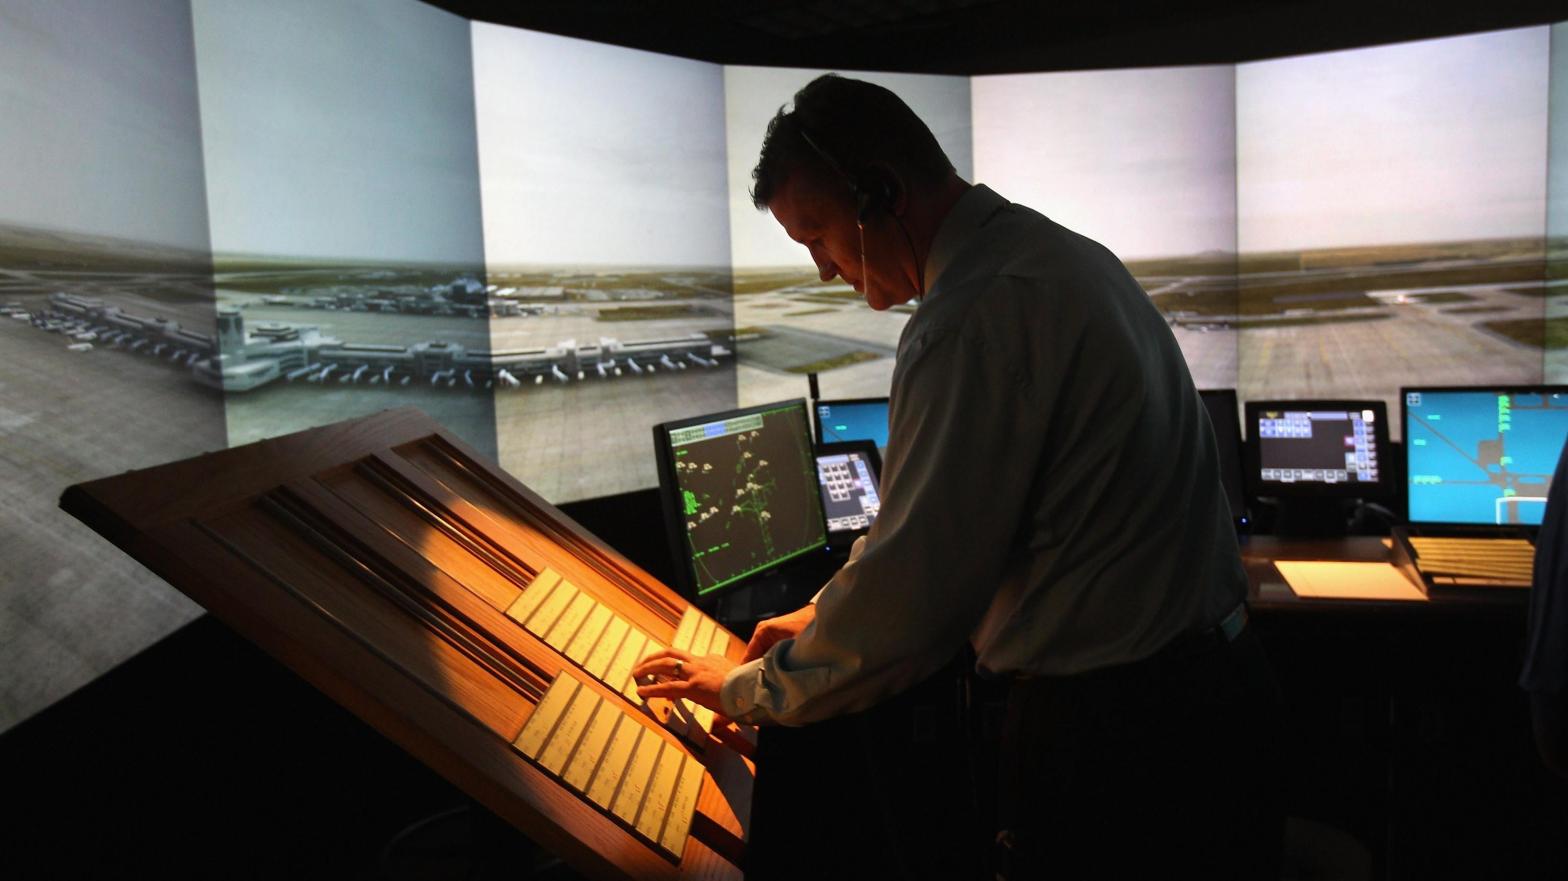 An air traffic controller works inside an airport tower simulator on July 14, 2011 at the Denver International Airport in Denver, Colorado (Photo: John Moore, Getty Images)